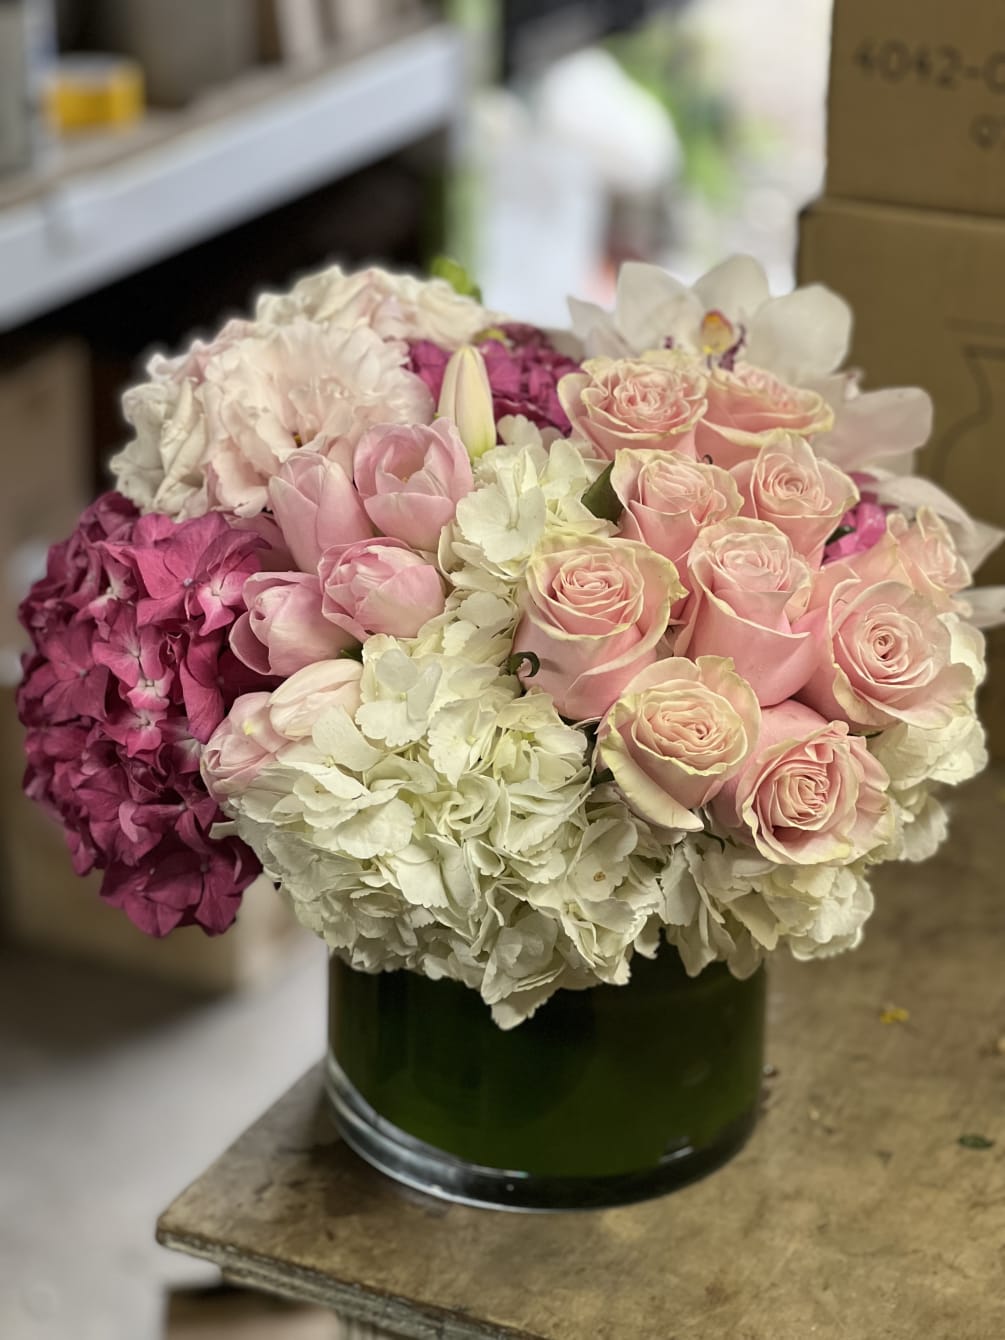 A luxurious, mix of roses, hydrangea, tulips and exotic Cymbidium Orchid blooms